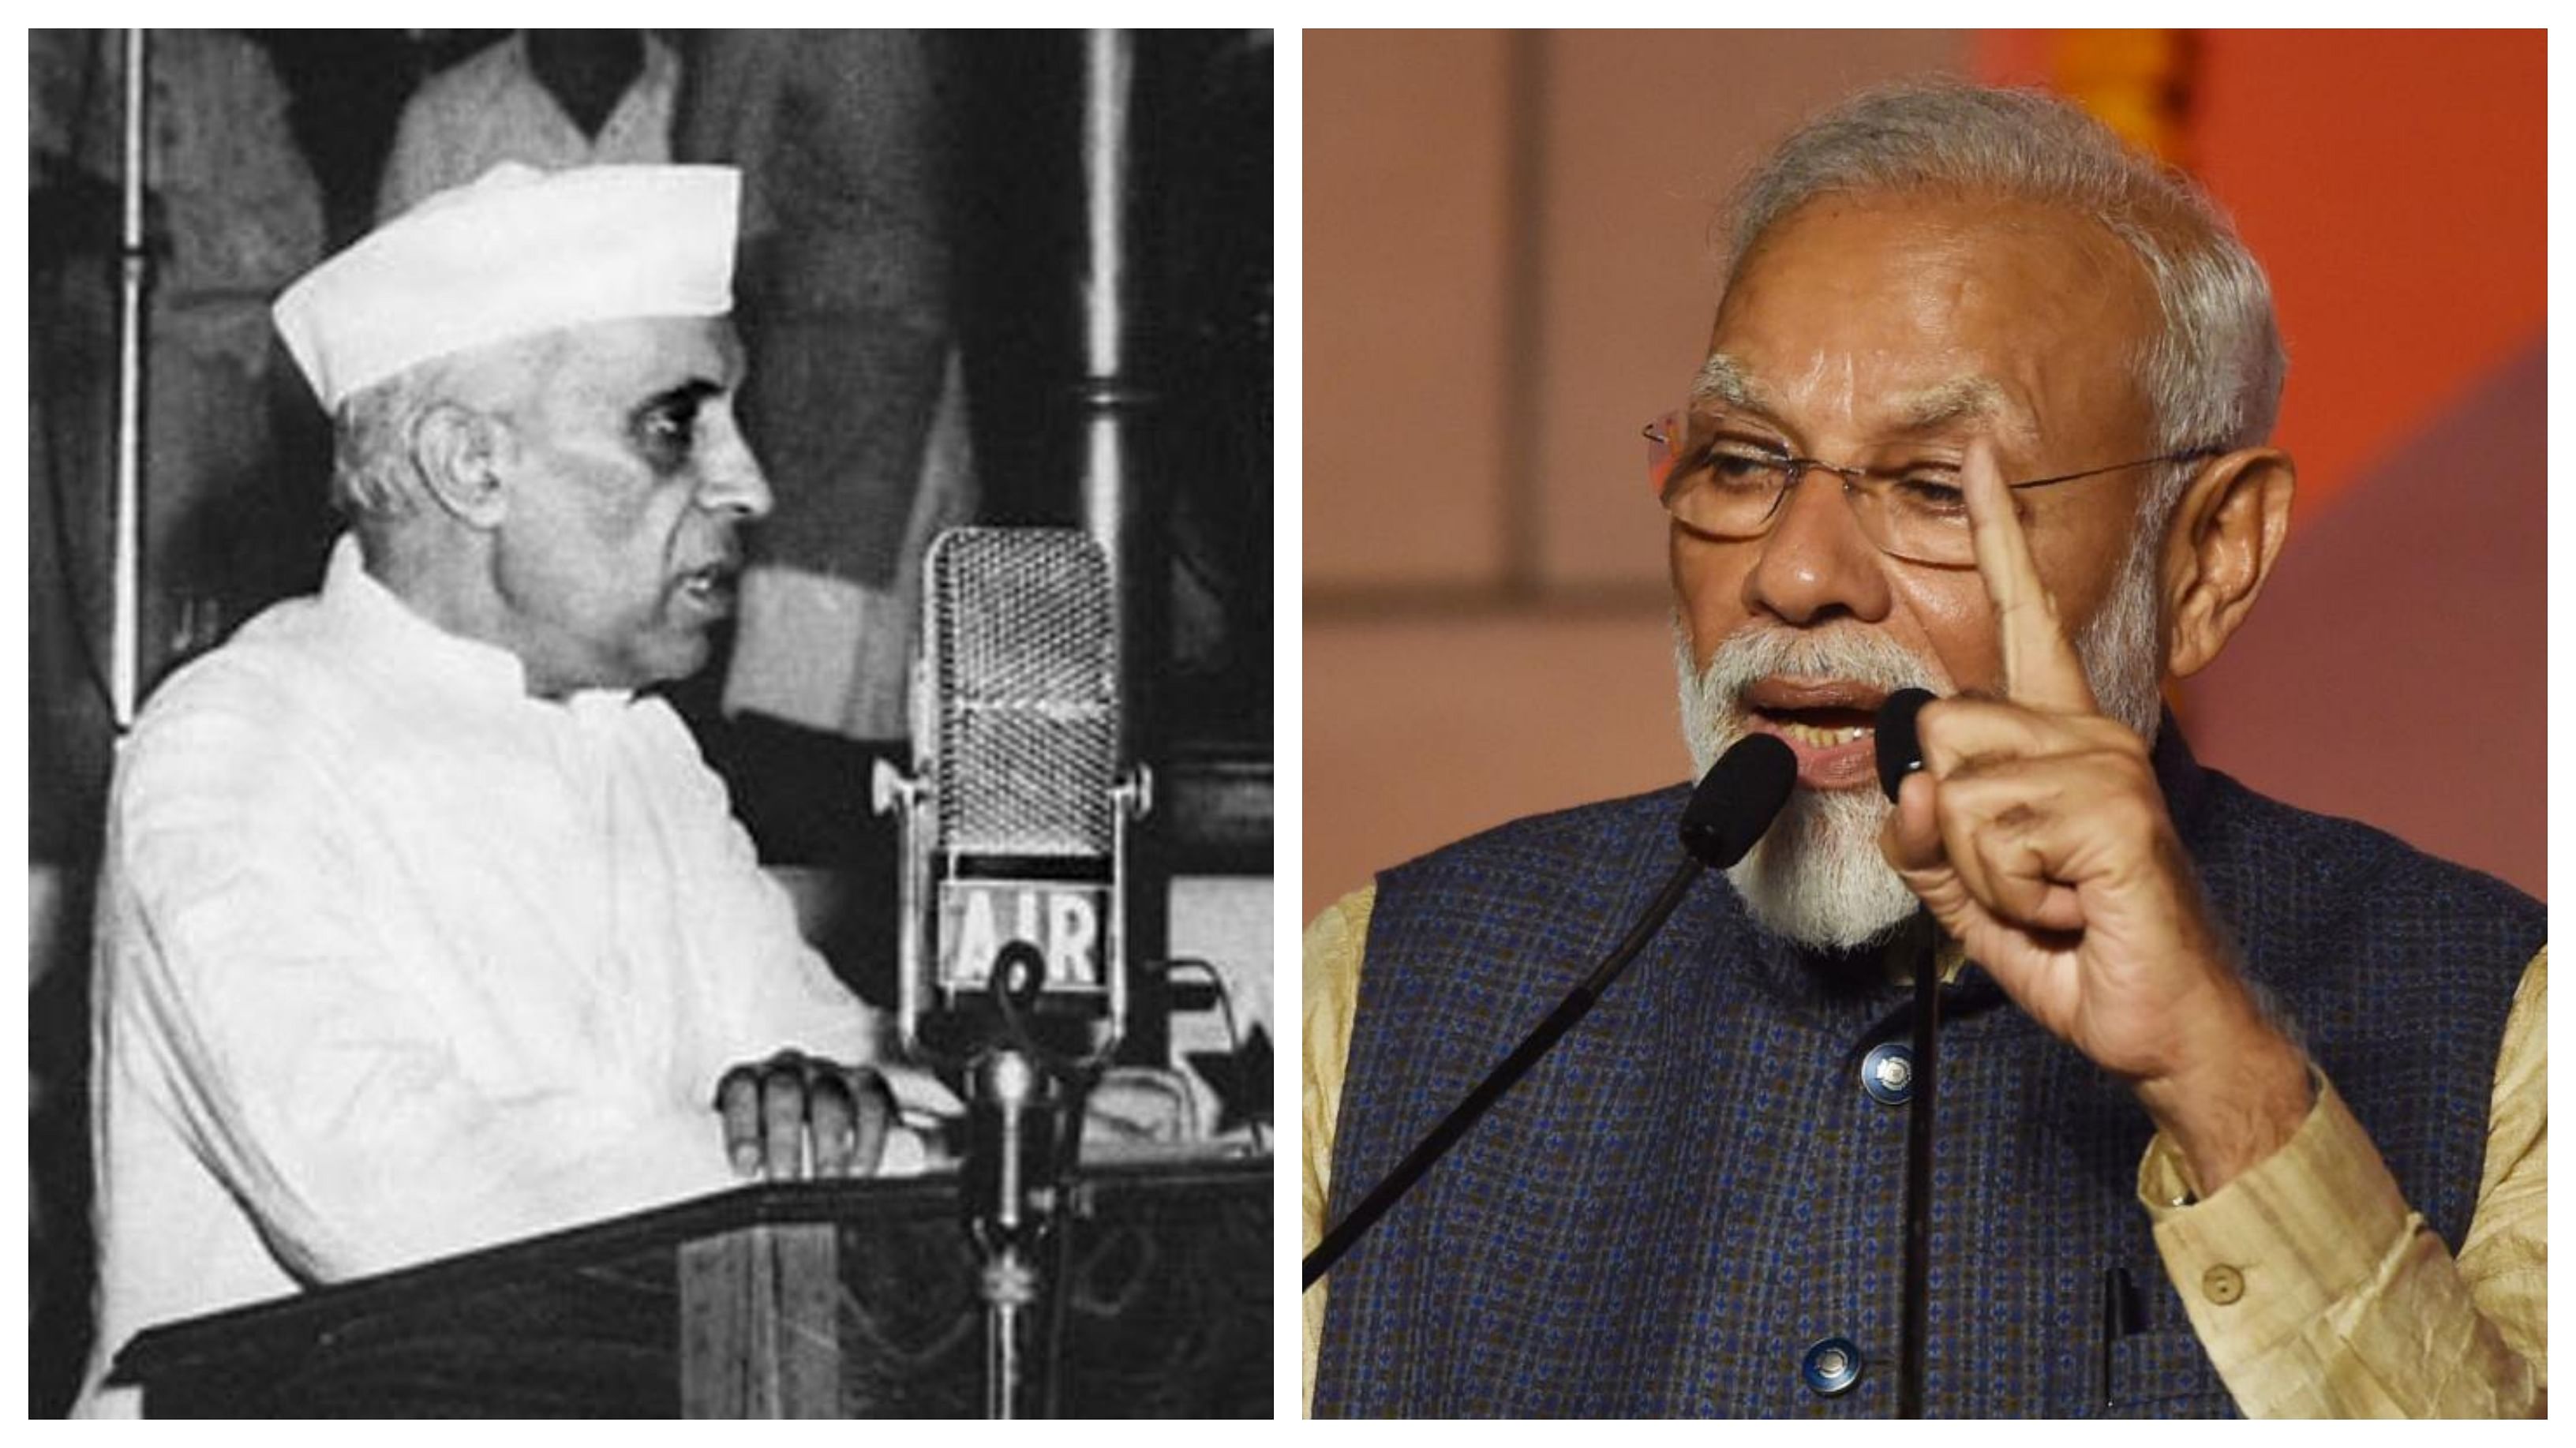 The BJP has not let Nehru fade from public memory and has set itself up in opposition to the spirit of the late prime minister, utilising every opportunity it can find to critique his contribution to India.